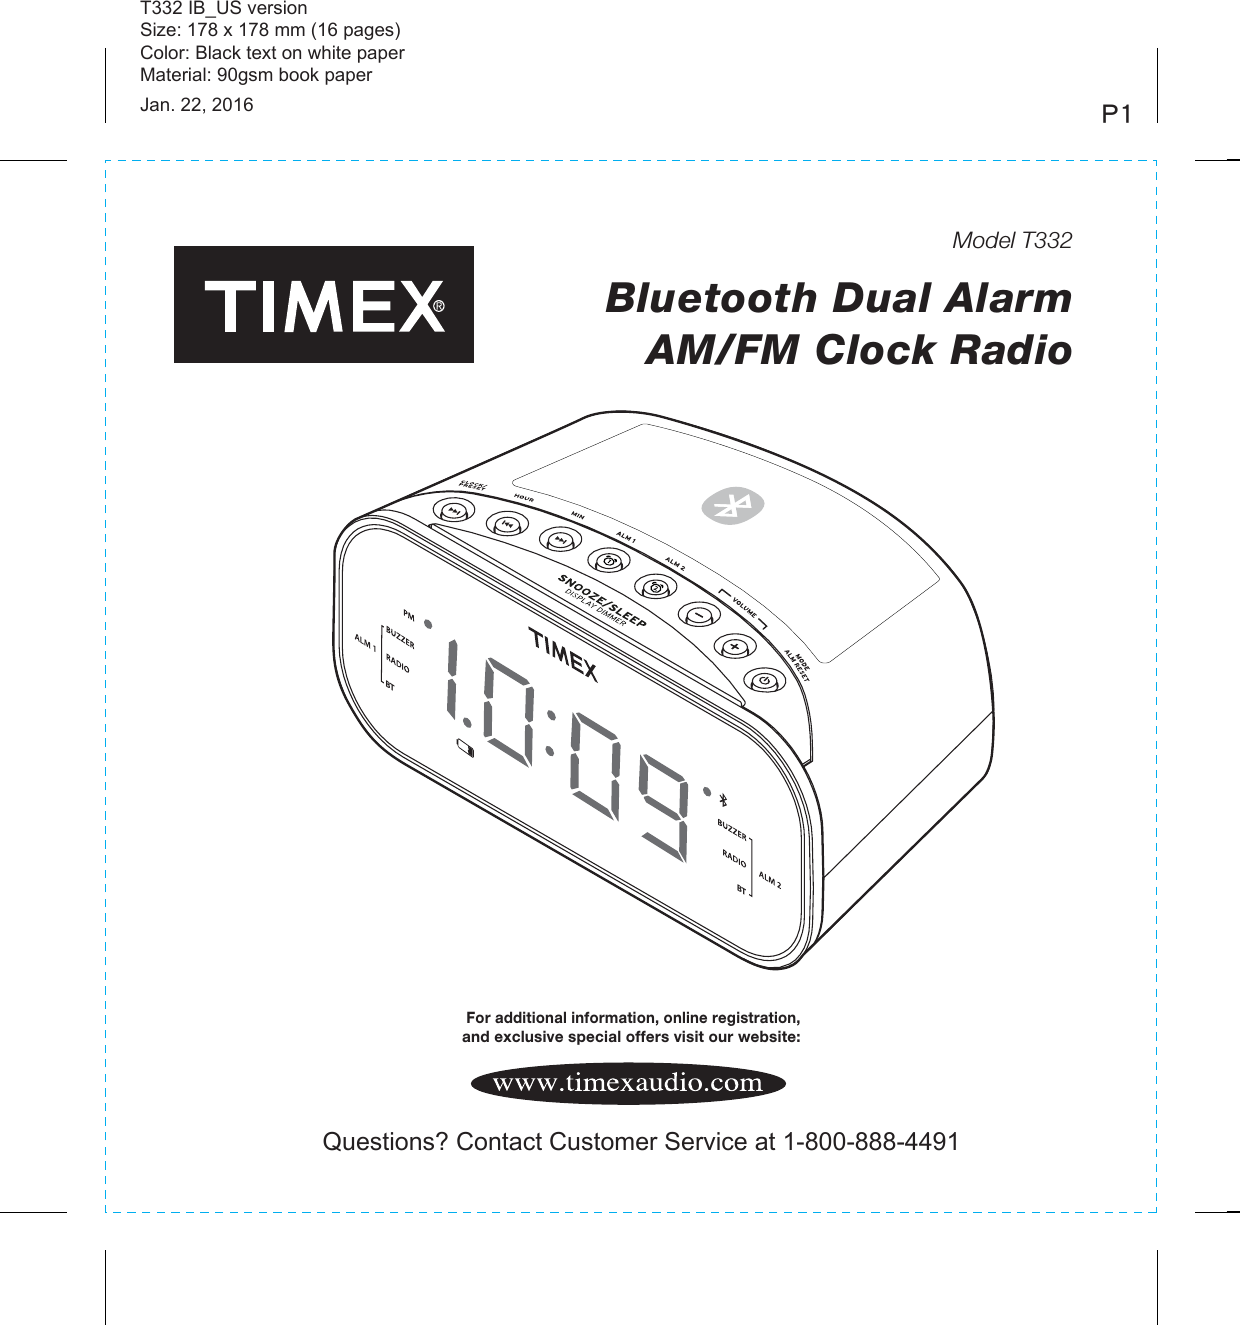 T332 IB_US versionSize: 178 x 178 mm (16 pages)Color: Black text on white paperMaterial: 90gsm book paperJan. 22, 2016 P1Model T332Bluetooth Dual Alarm AM/FM Clock Radio For additional information, online registration, and exclusive special offers visit our website:Questions? Contact Customer Service at 1-800-888-4491BTBT